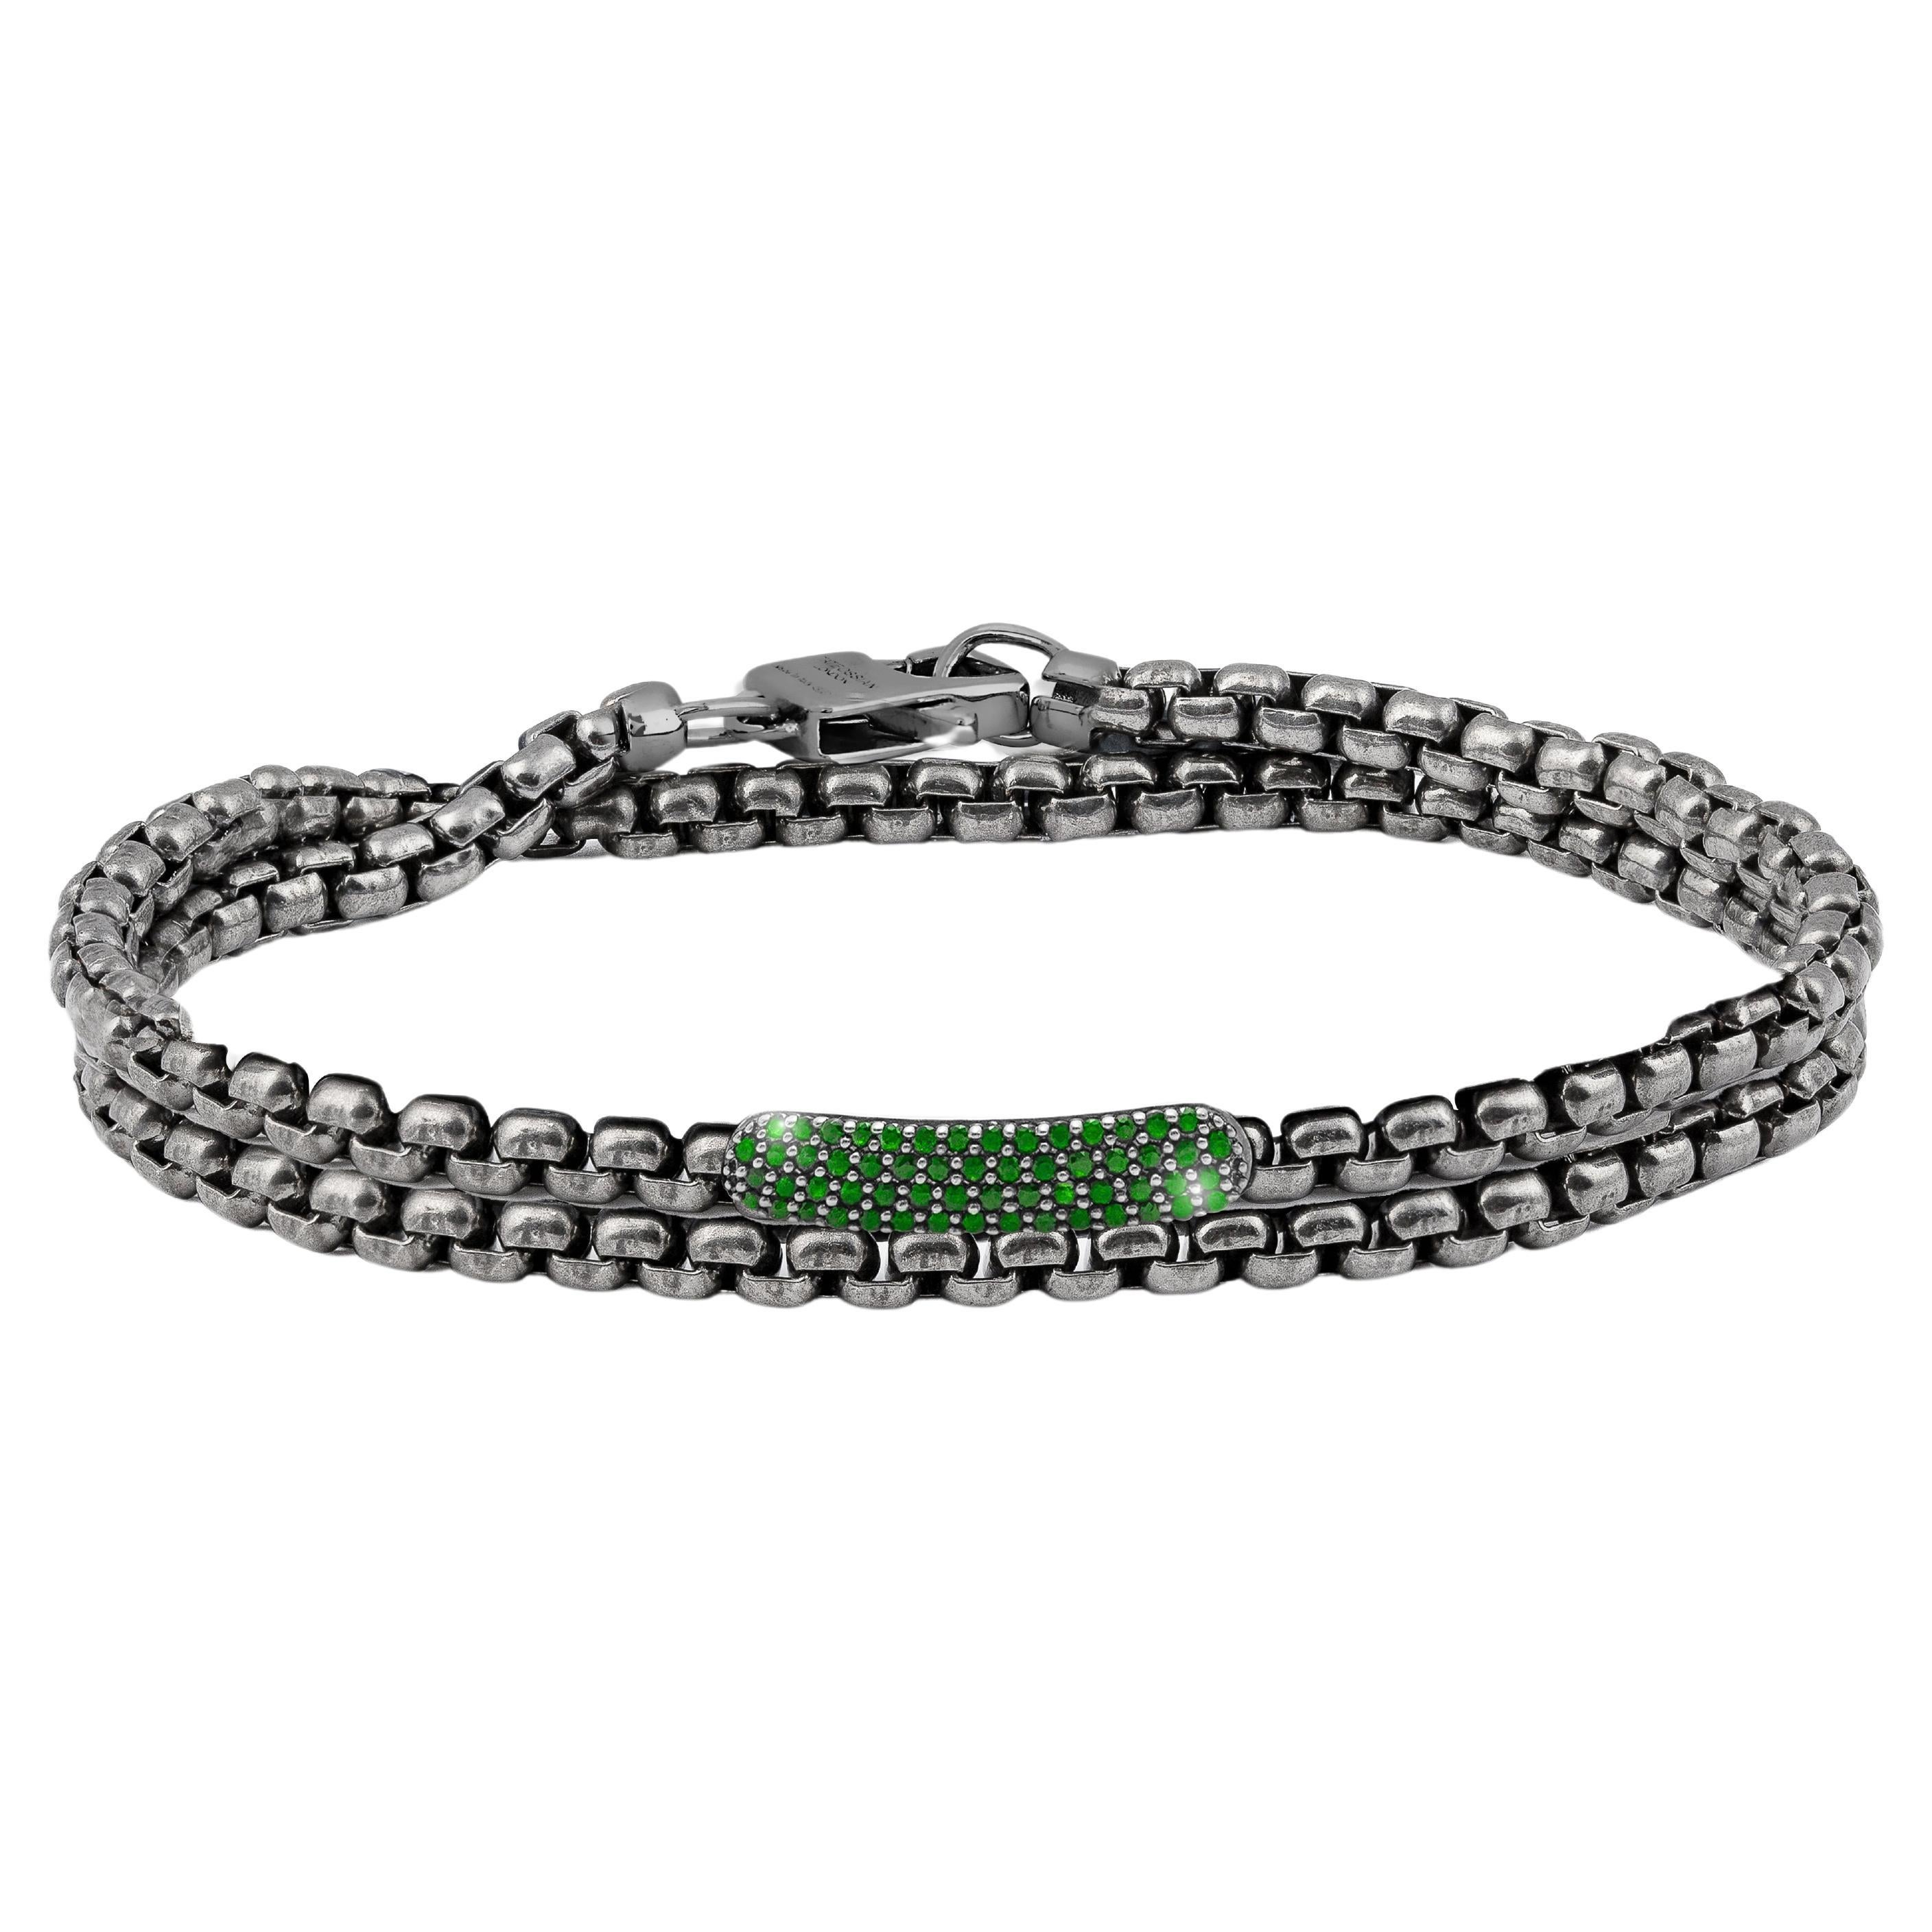 Black Rhodium Plated Sterling Silver Catena Baton Bracelet with Emeralds, Size M For Sale